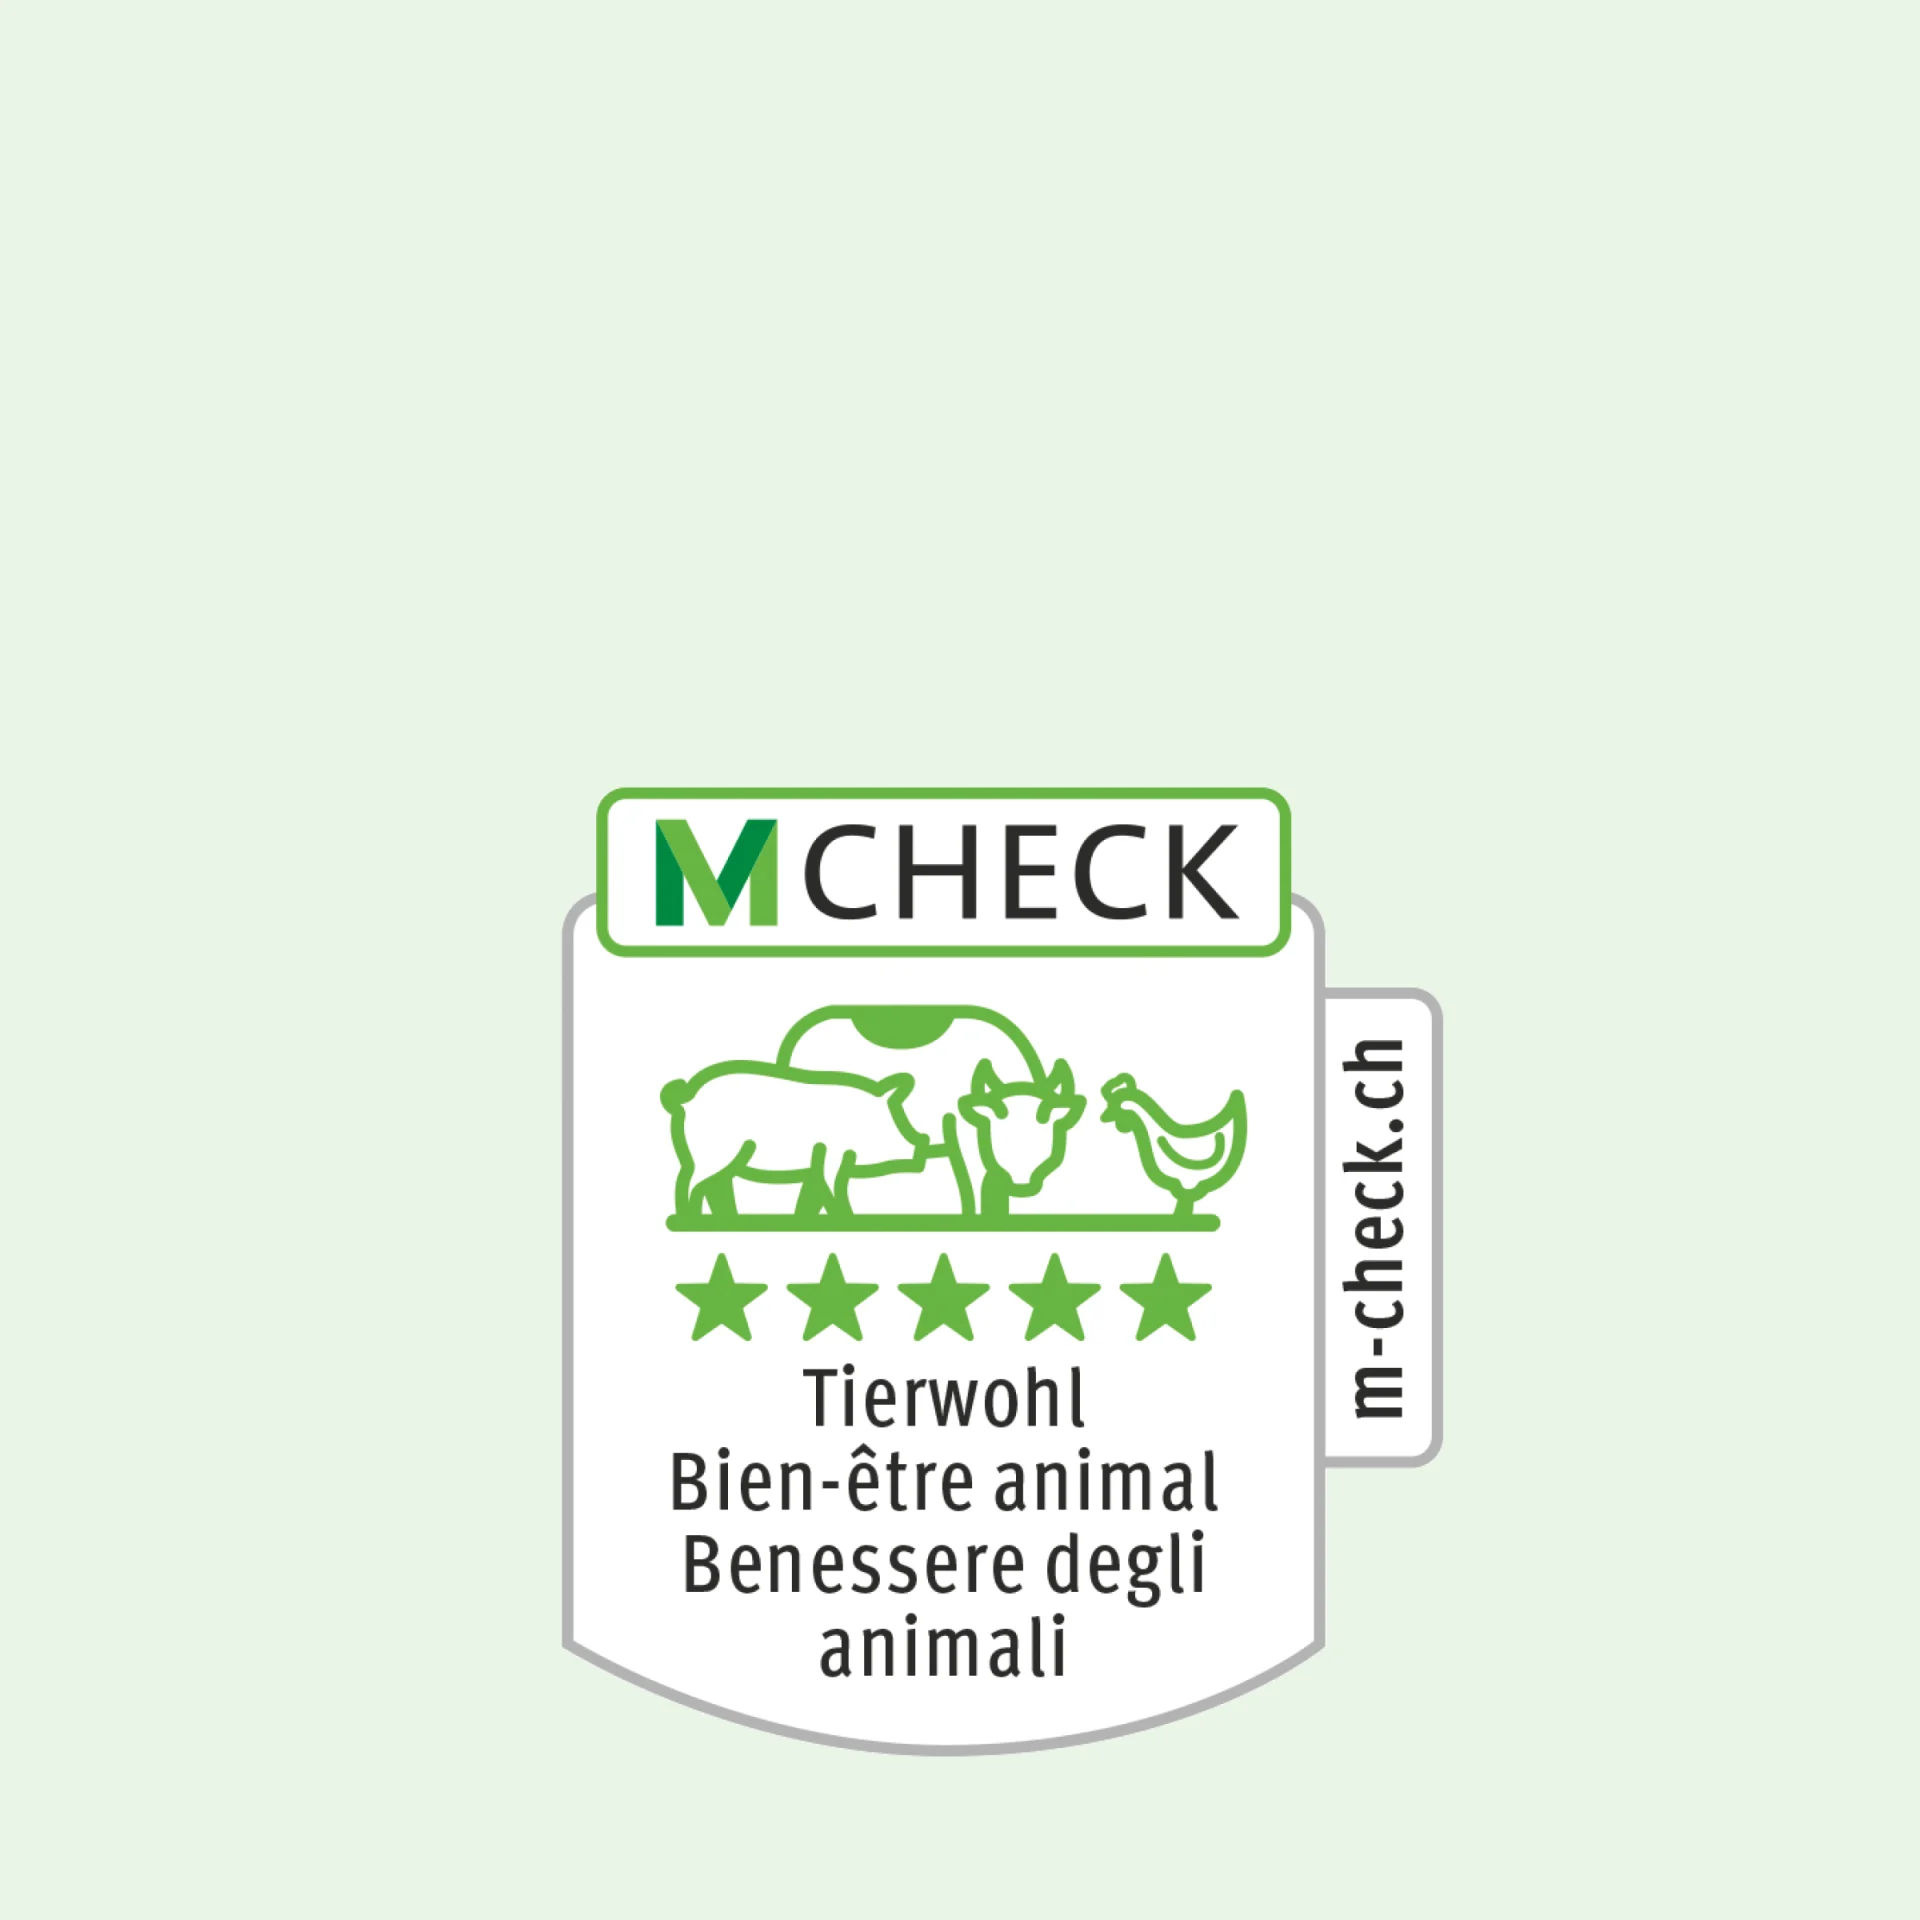 M-Check icon with a cow, a pig, a chicken and, below this, four stars for animal welfare.